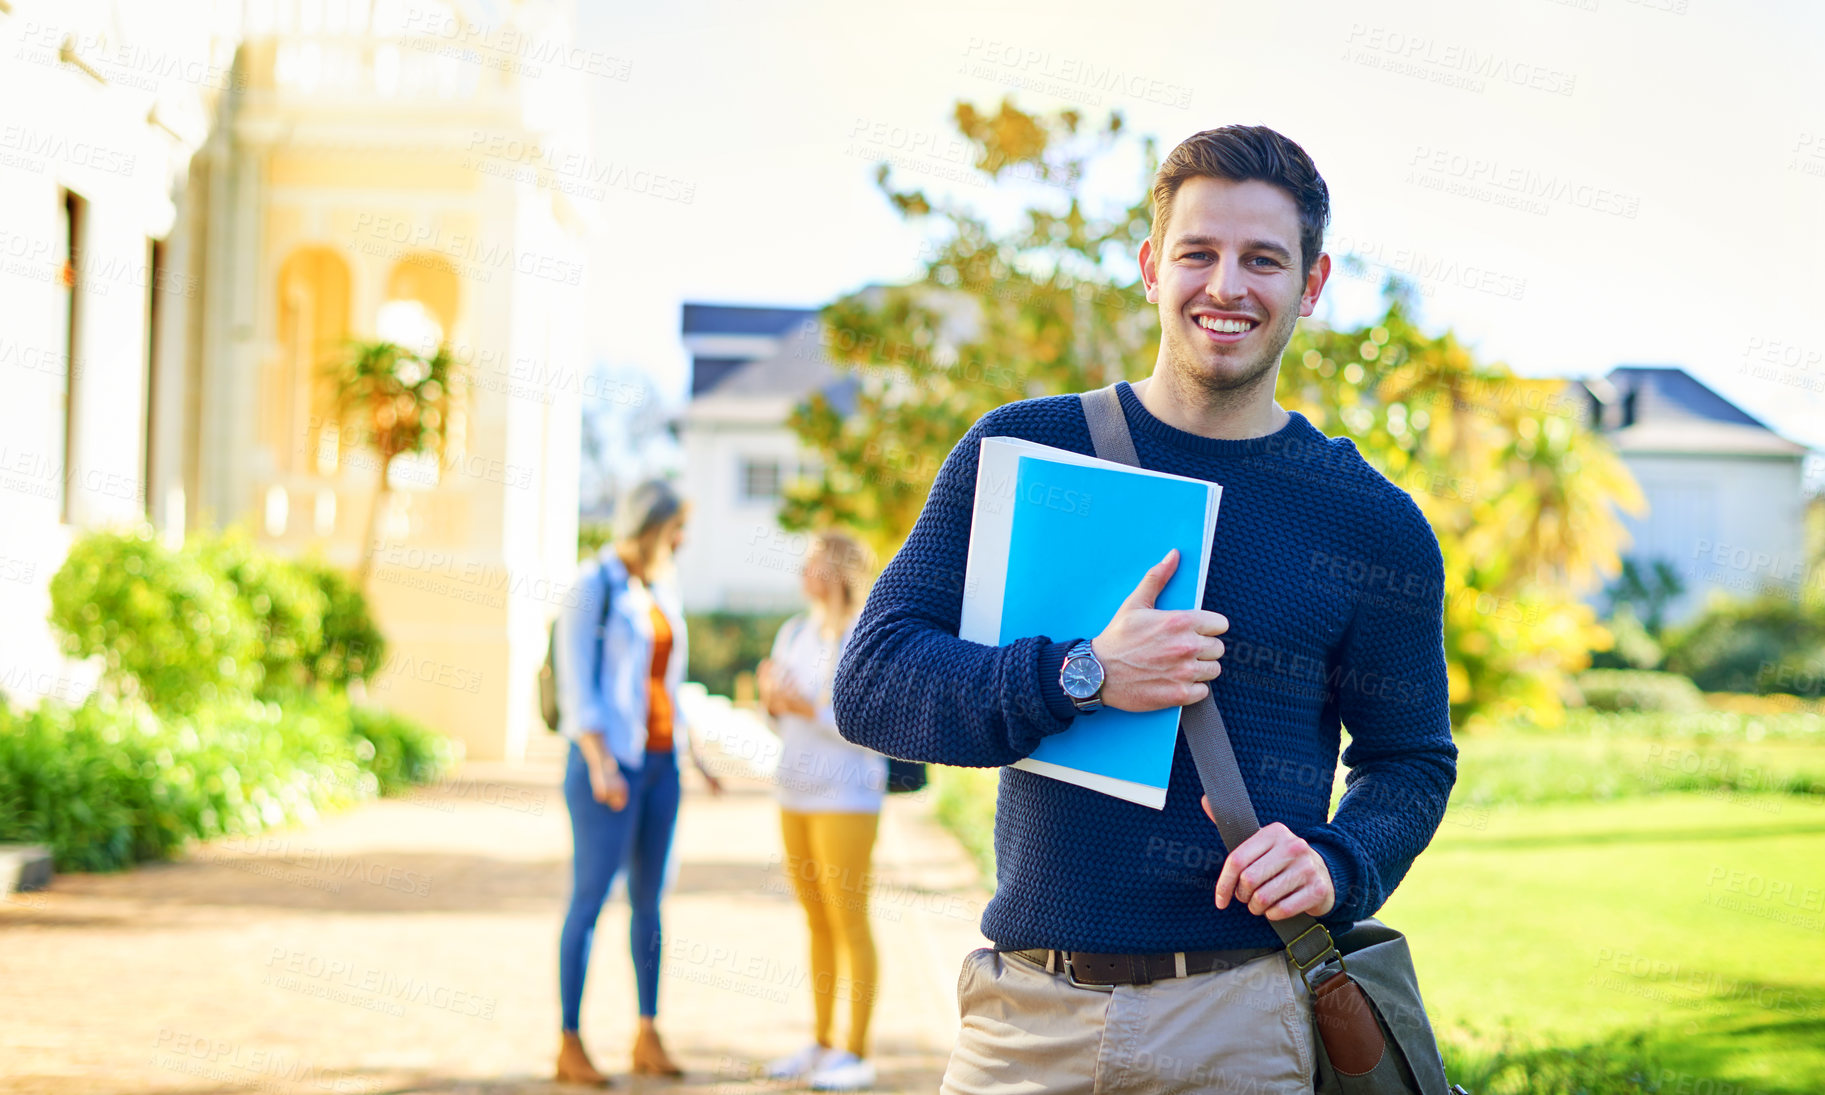 Buy stock photo Portrait of a male university student outside on campus